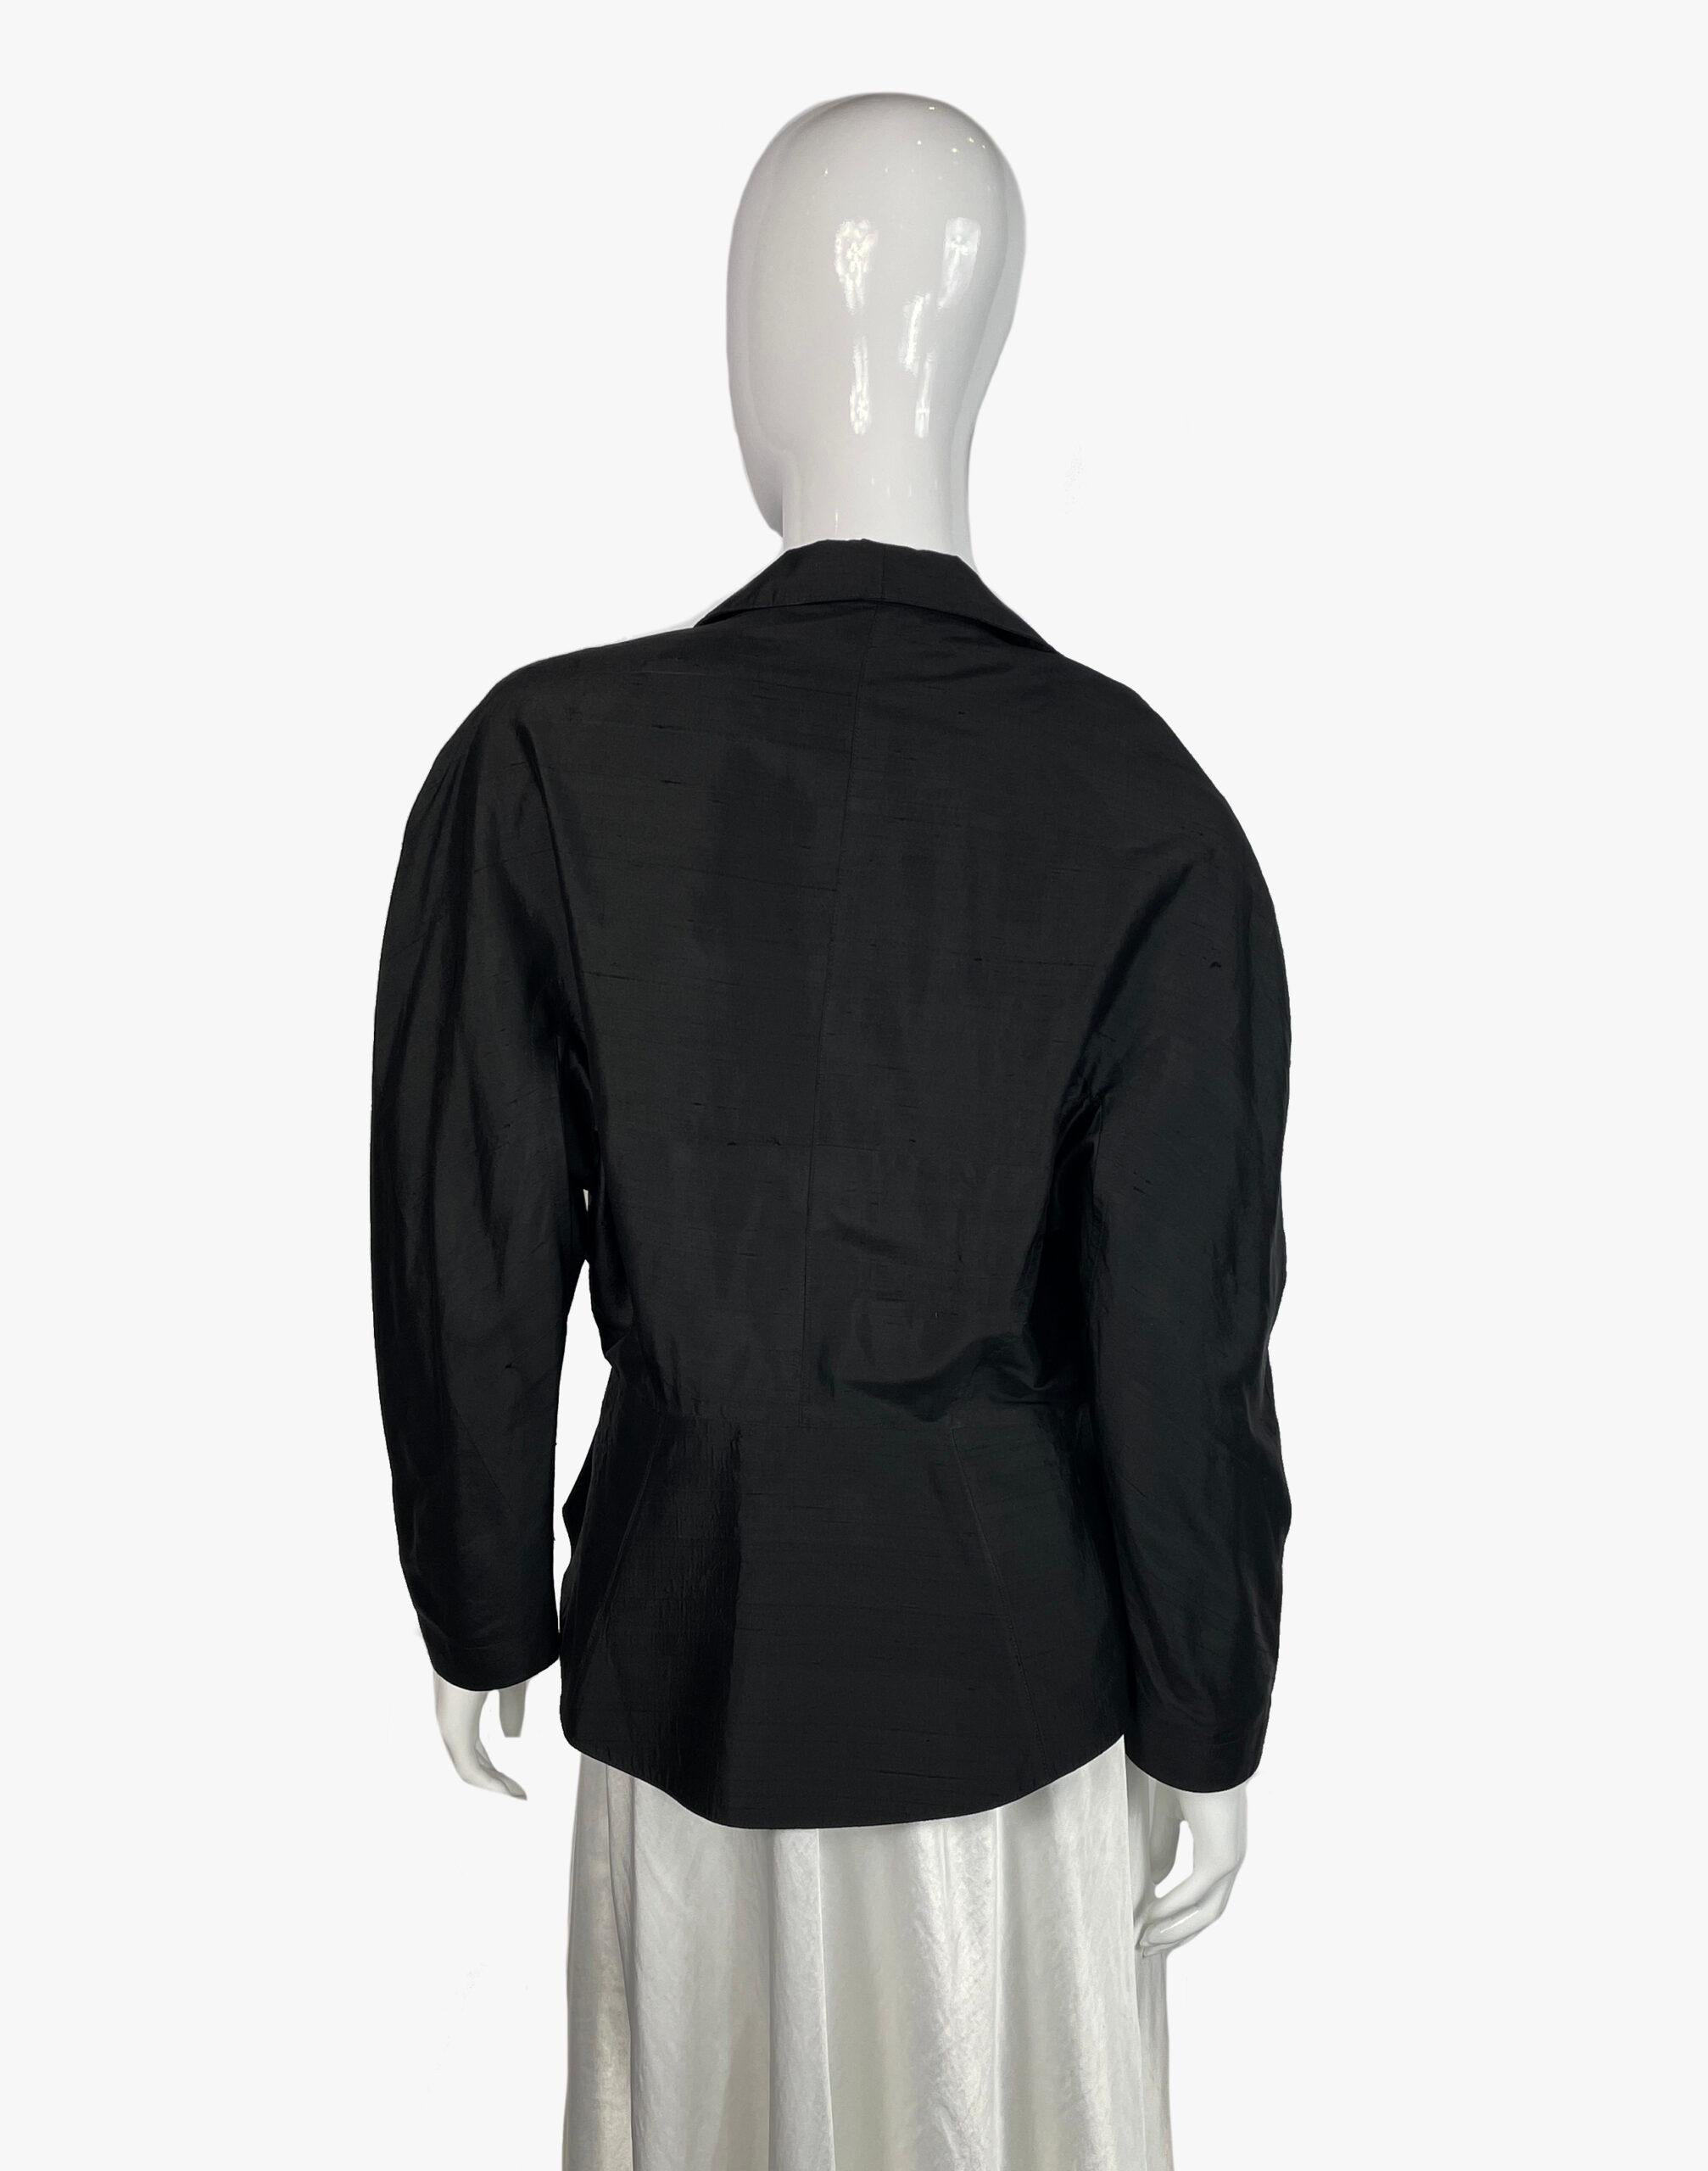 Thierry Mugler Vintage Silk Blazer with Architectural Cut, 1990s In Good Condition In New York, NY